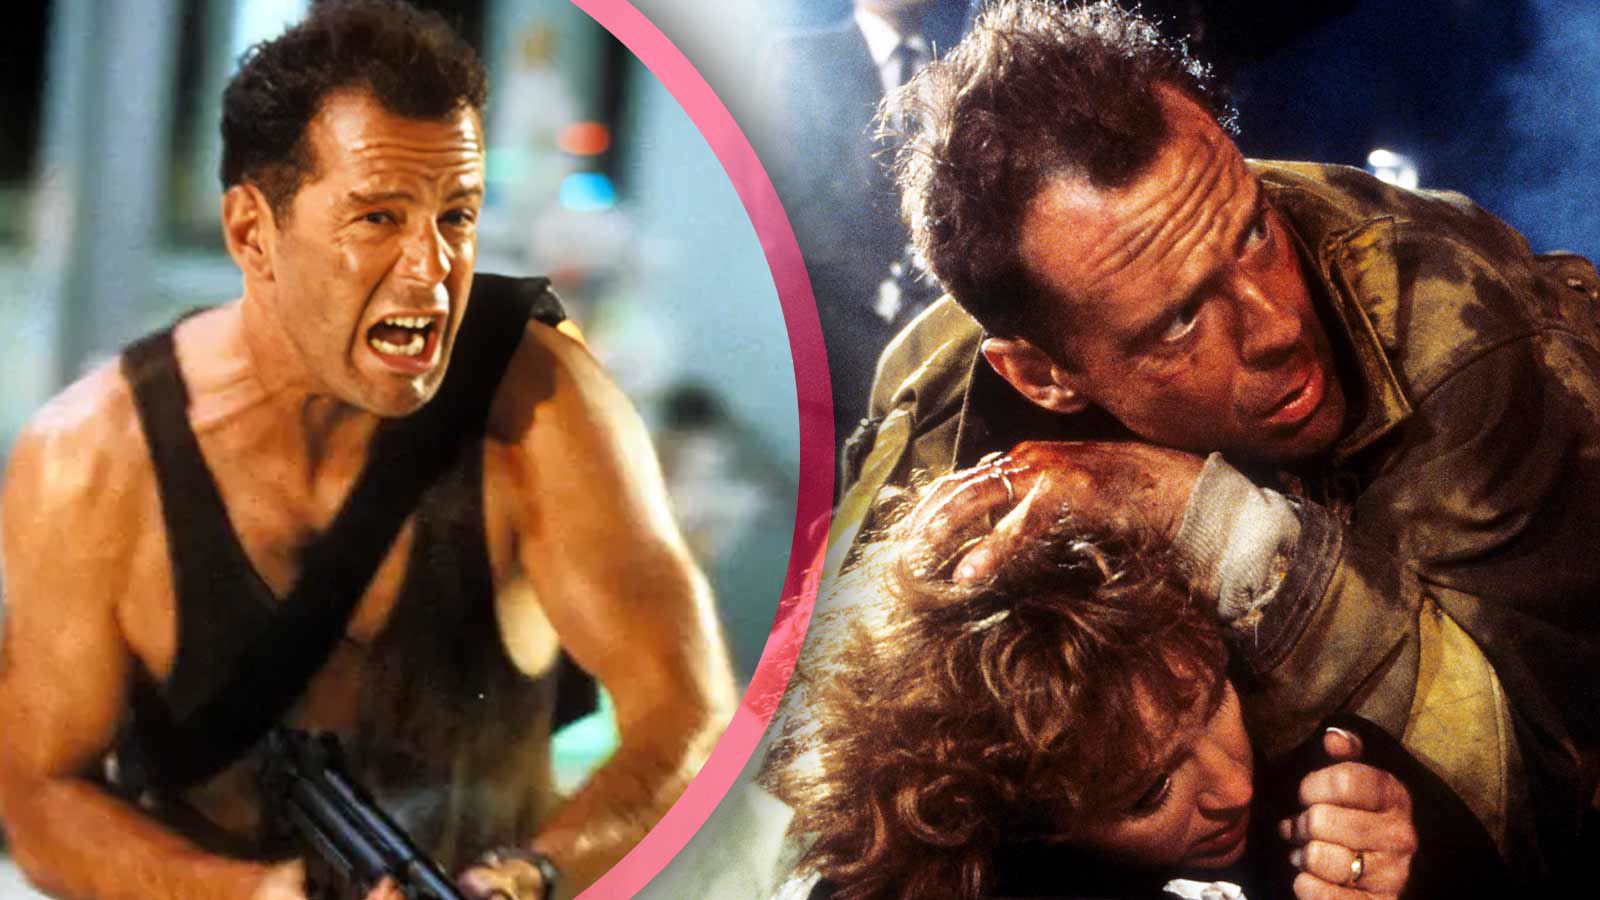 “It definitely was not in the script”: Bruce Willis’ Die Hard Co-star Completely Improvised One Thrilling Scene in the Film That is Still Comedy Gold